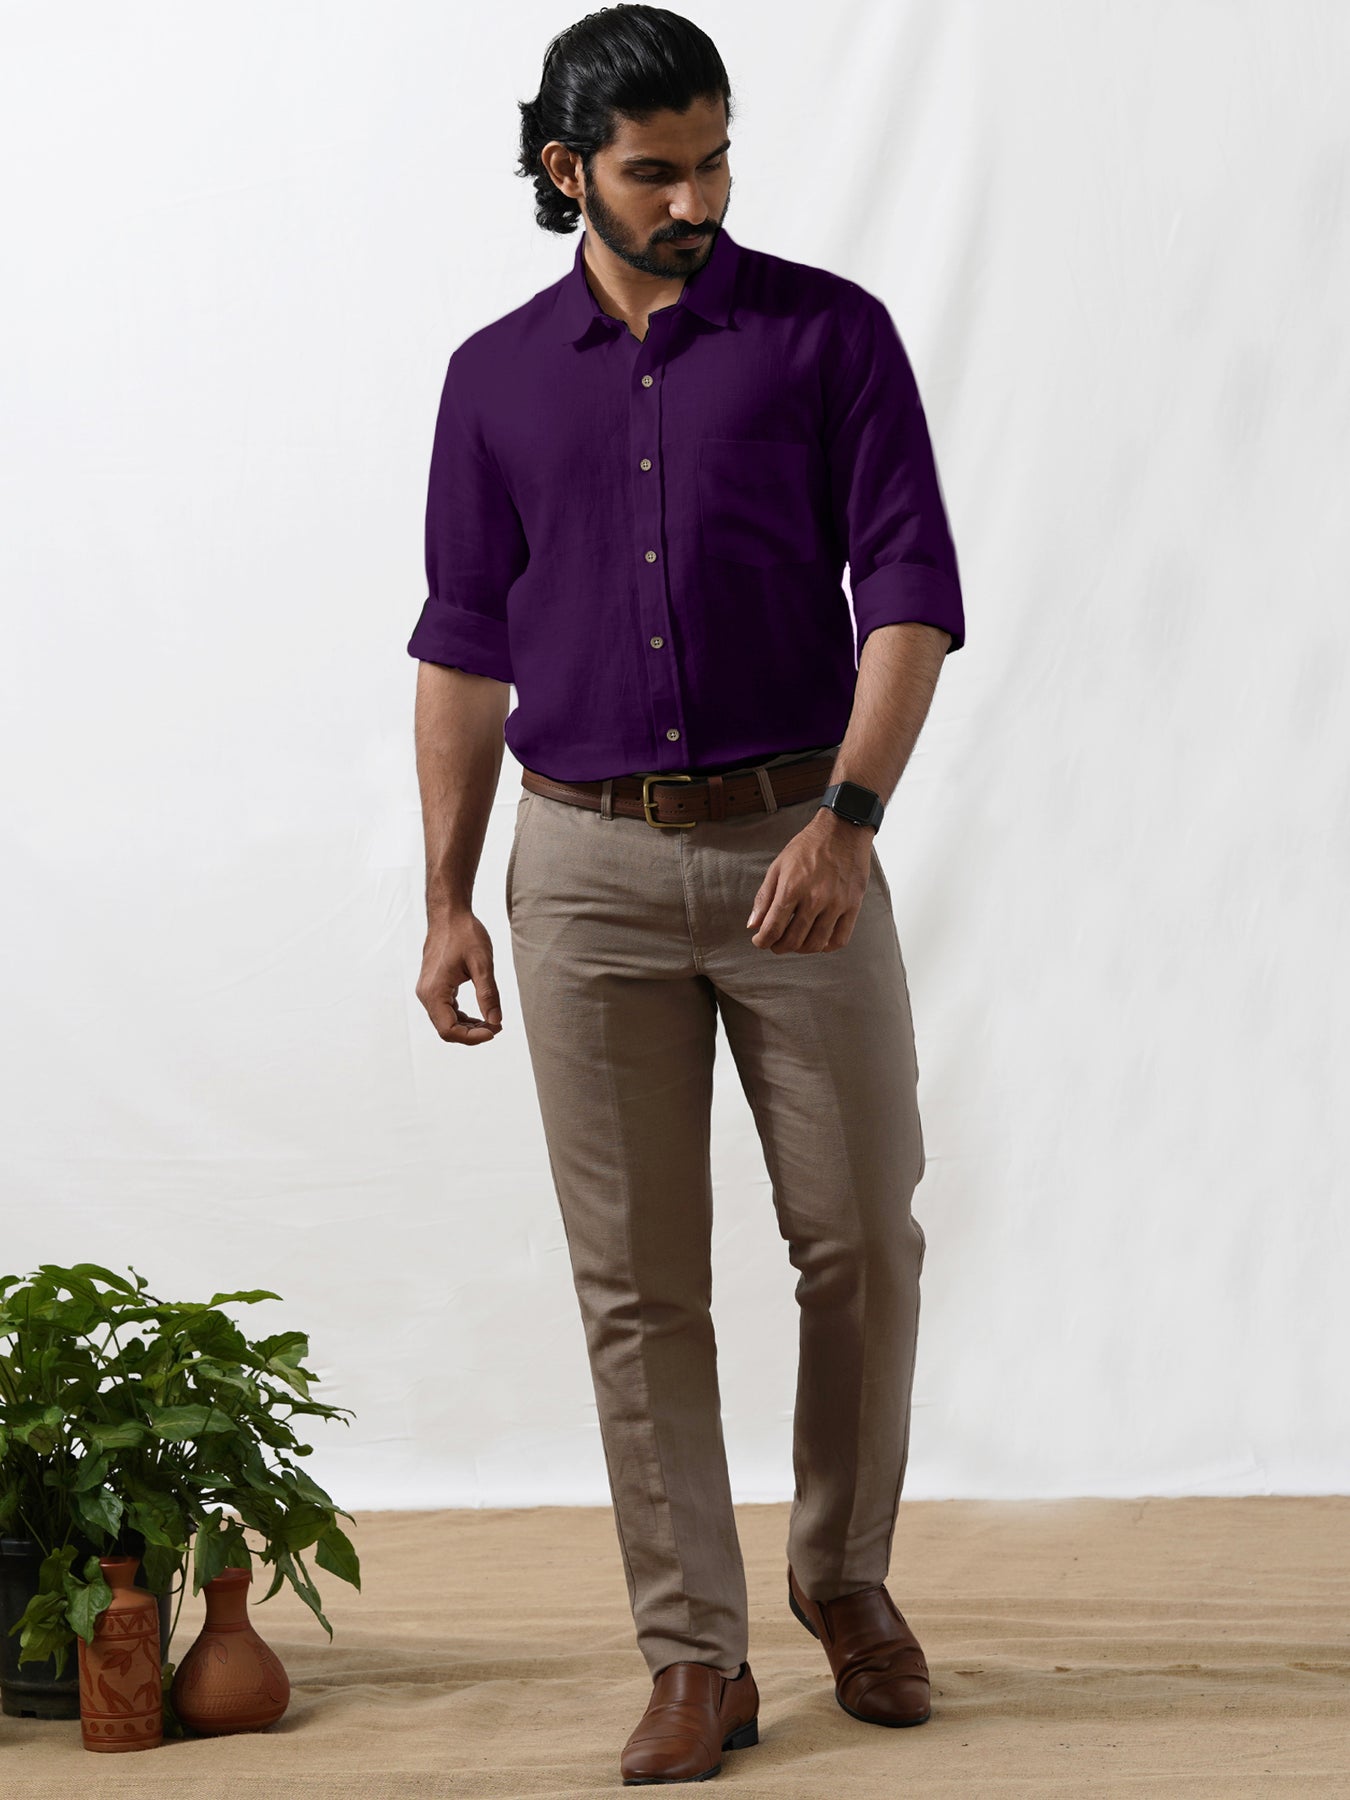 Dressing In A Purple Shirt, Gray Pants, A Black Tie, Leather Shoes, Two  Hands Putting In Pockets, One Foot Touching The Wall, A Young Businessman  Is Leaning Against The Wall, Relaxing. Stock